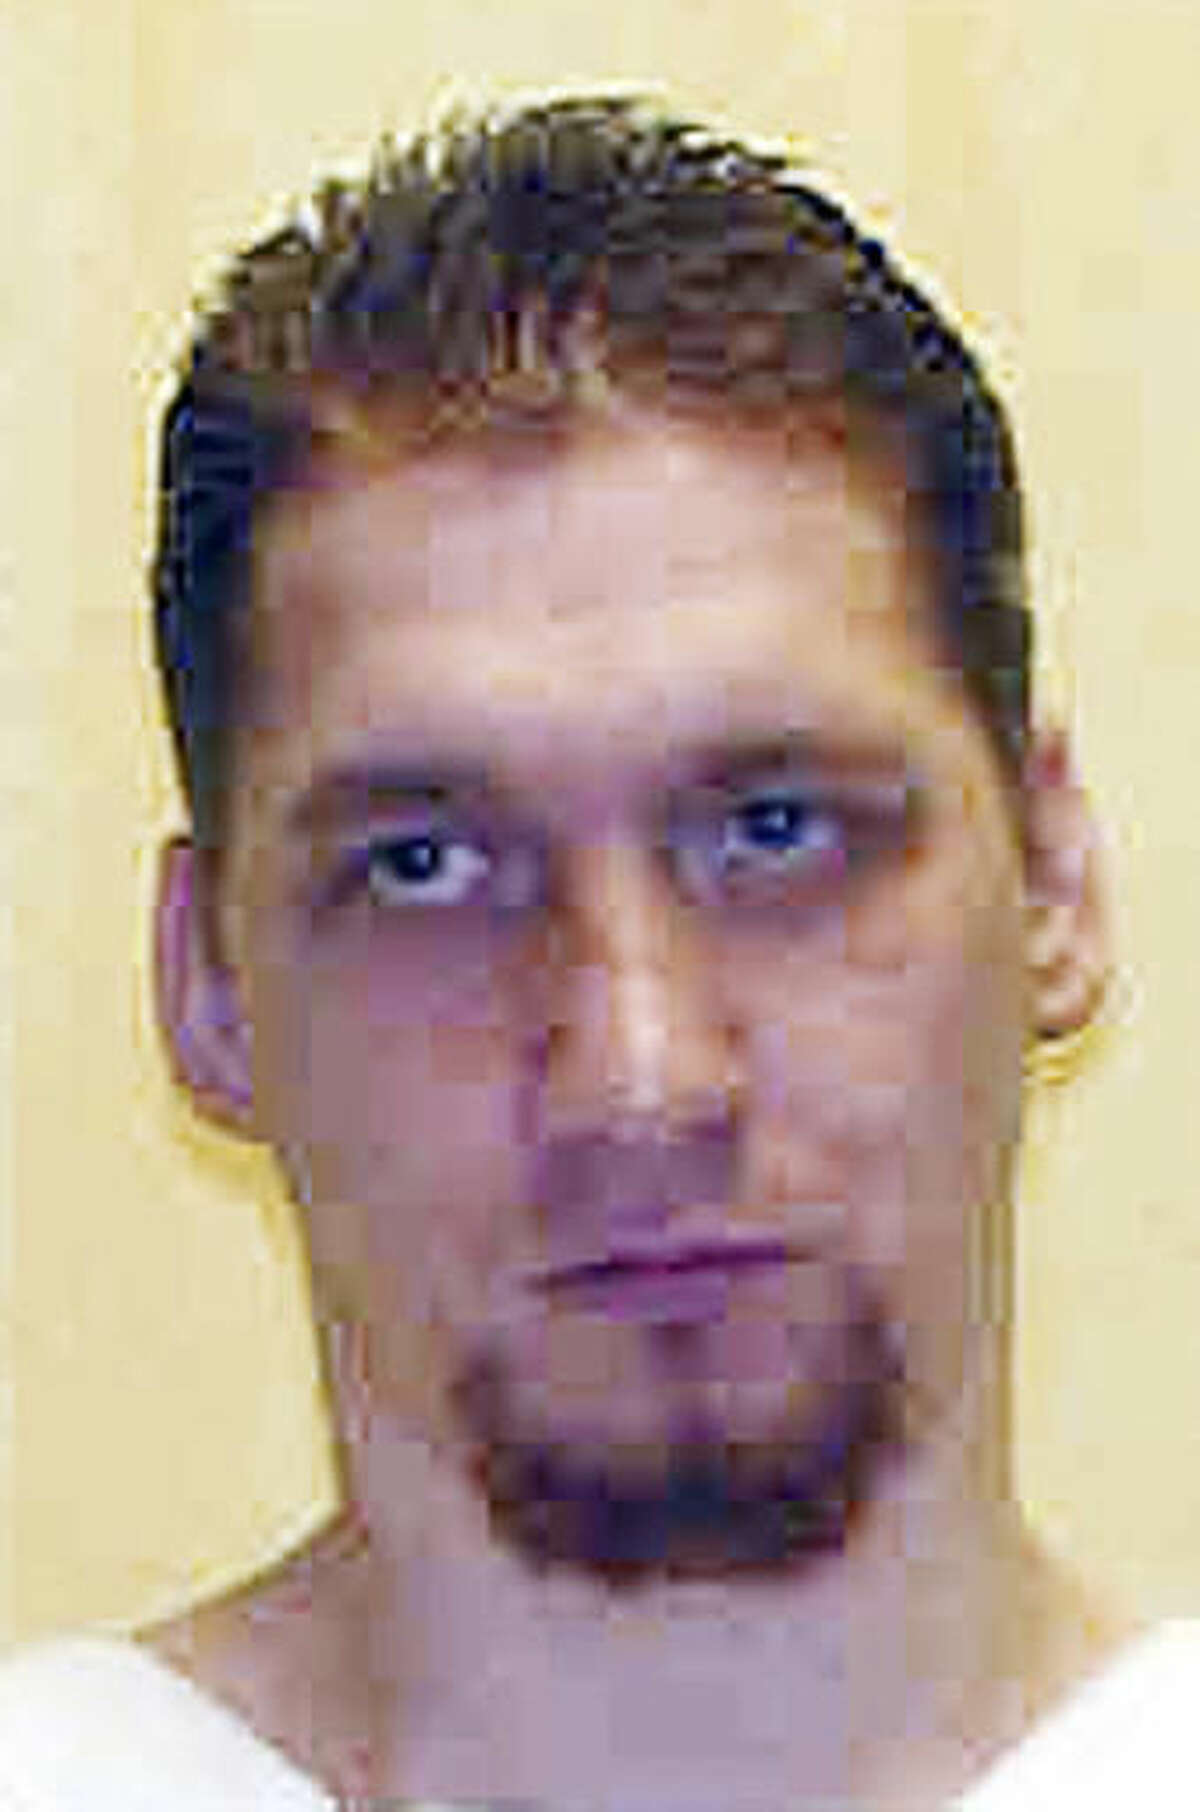 FILE - This undated file photo provided by the Ohio Department of Rehabilitation and Correction shows death row inmate Ronald Phillips, convicted of the 1993 rape and murder of his girlfriend's 3-year-old daughter in Akron, Ohio. Phillips asked a federal court to postpone his scheduled Jan. 12, 2017, execution in legal documents filed Friday, Nov. 11, 2016, to allow more time to hear his challenge to Ohio's new three-drug method to carry out death sentences. (Ohio Department of Rehabilitation and Correction via AP, File)